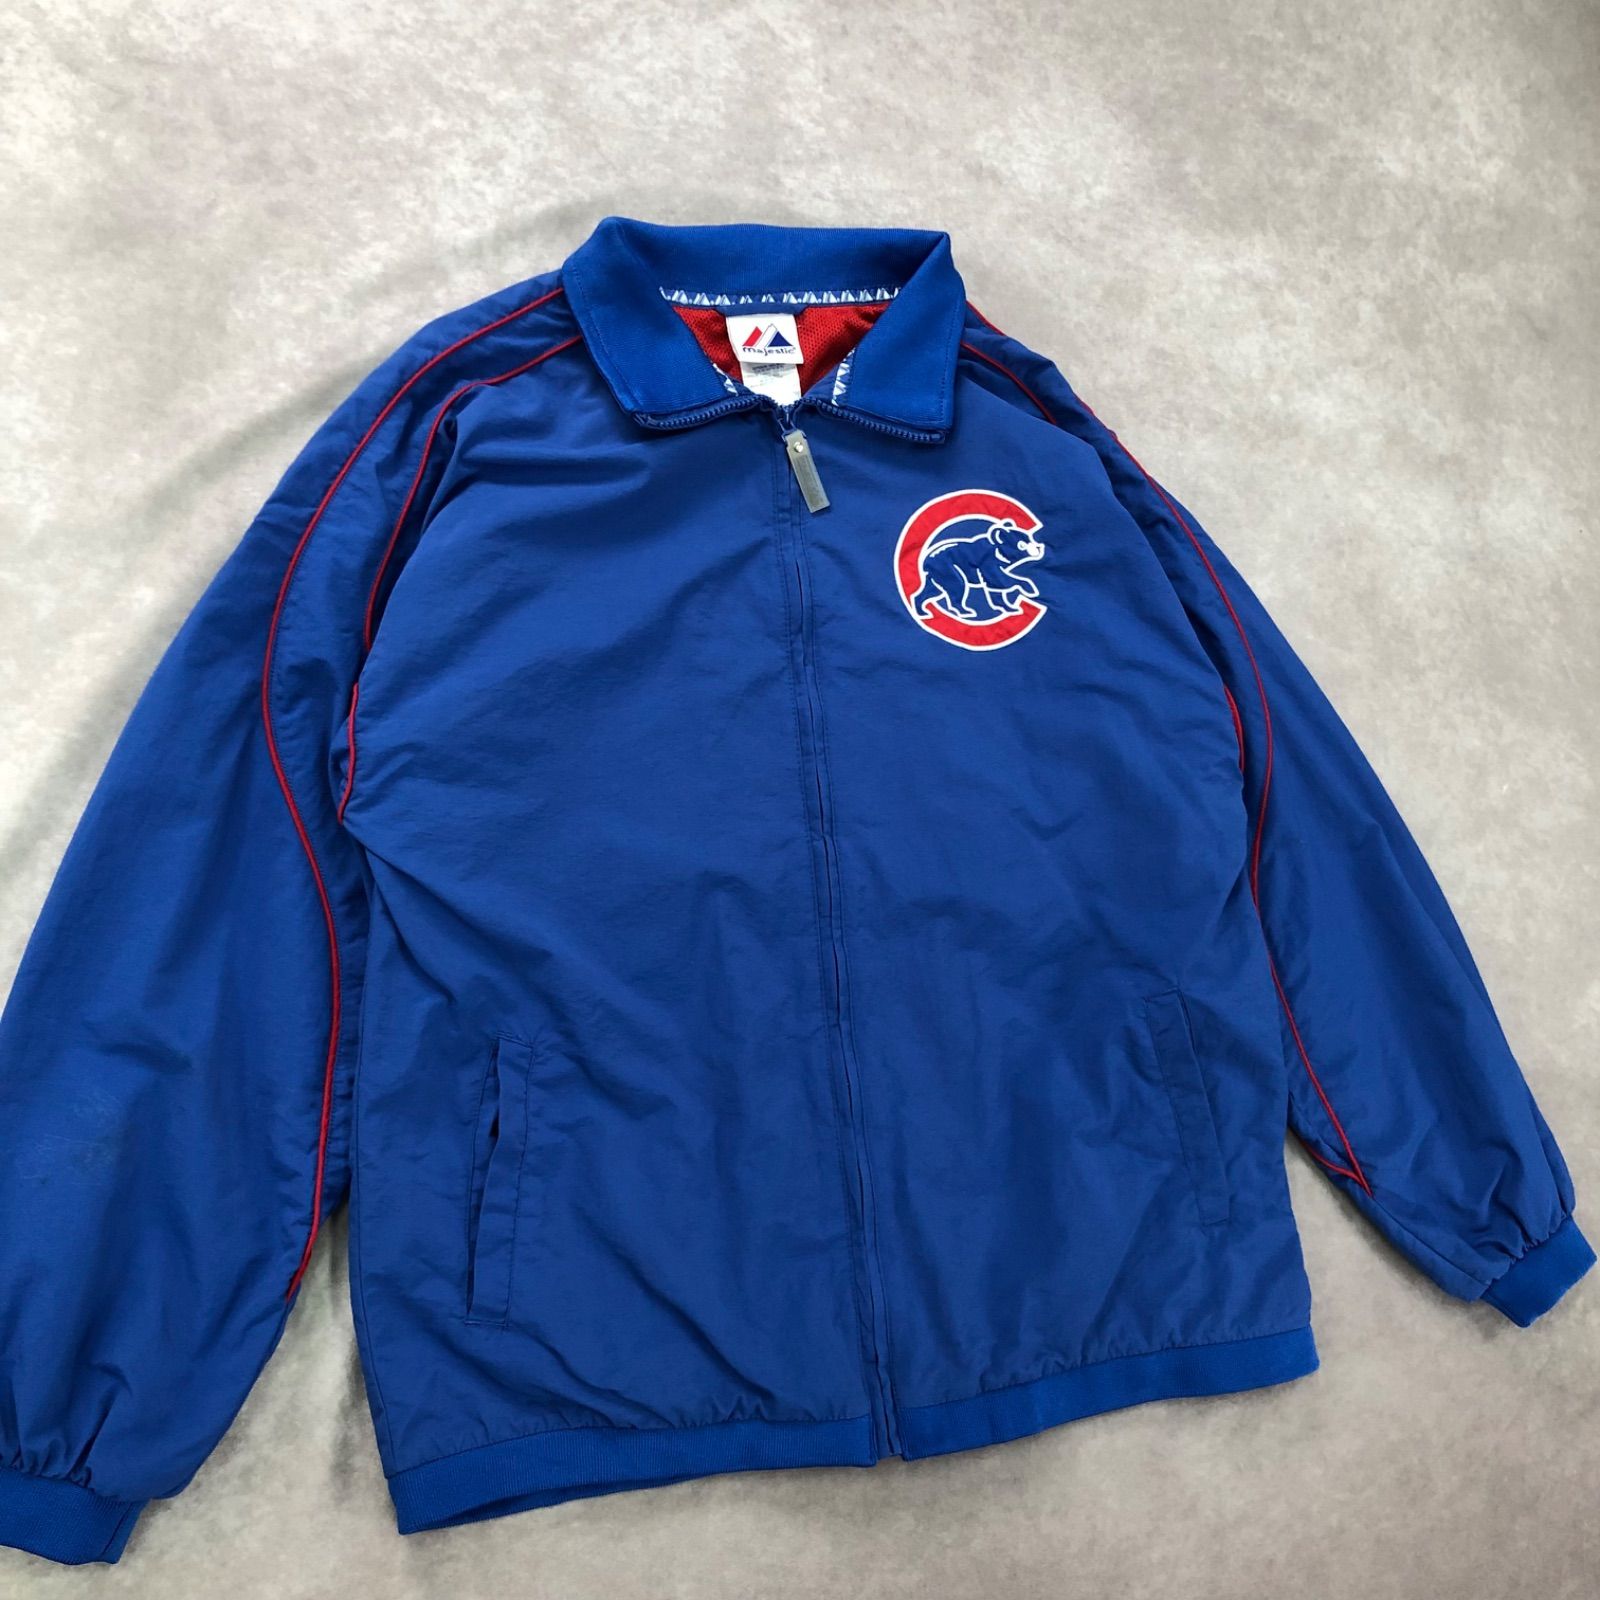 CHICAGO CUBS majestic MLB シカゴ カブス スタジャン - スポーツ別